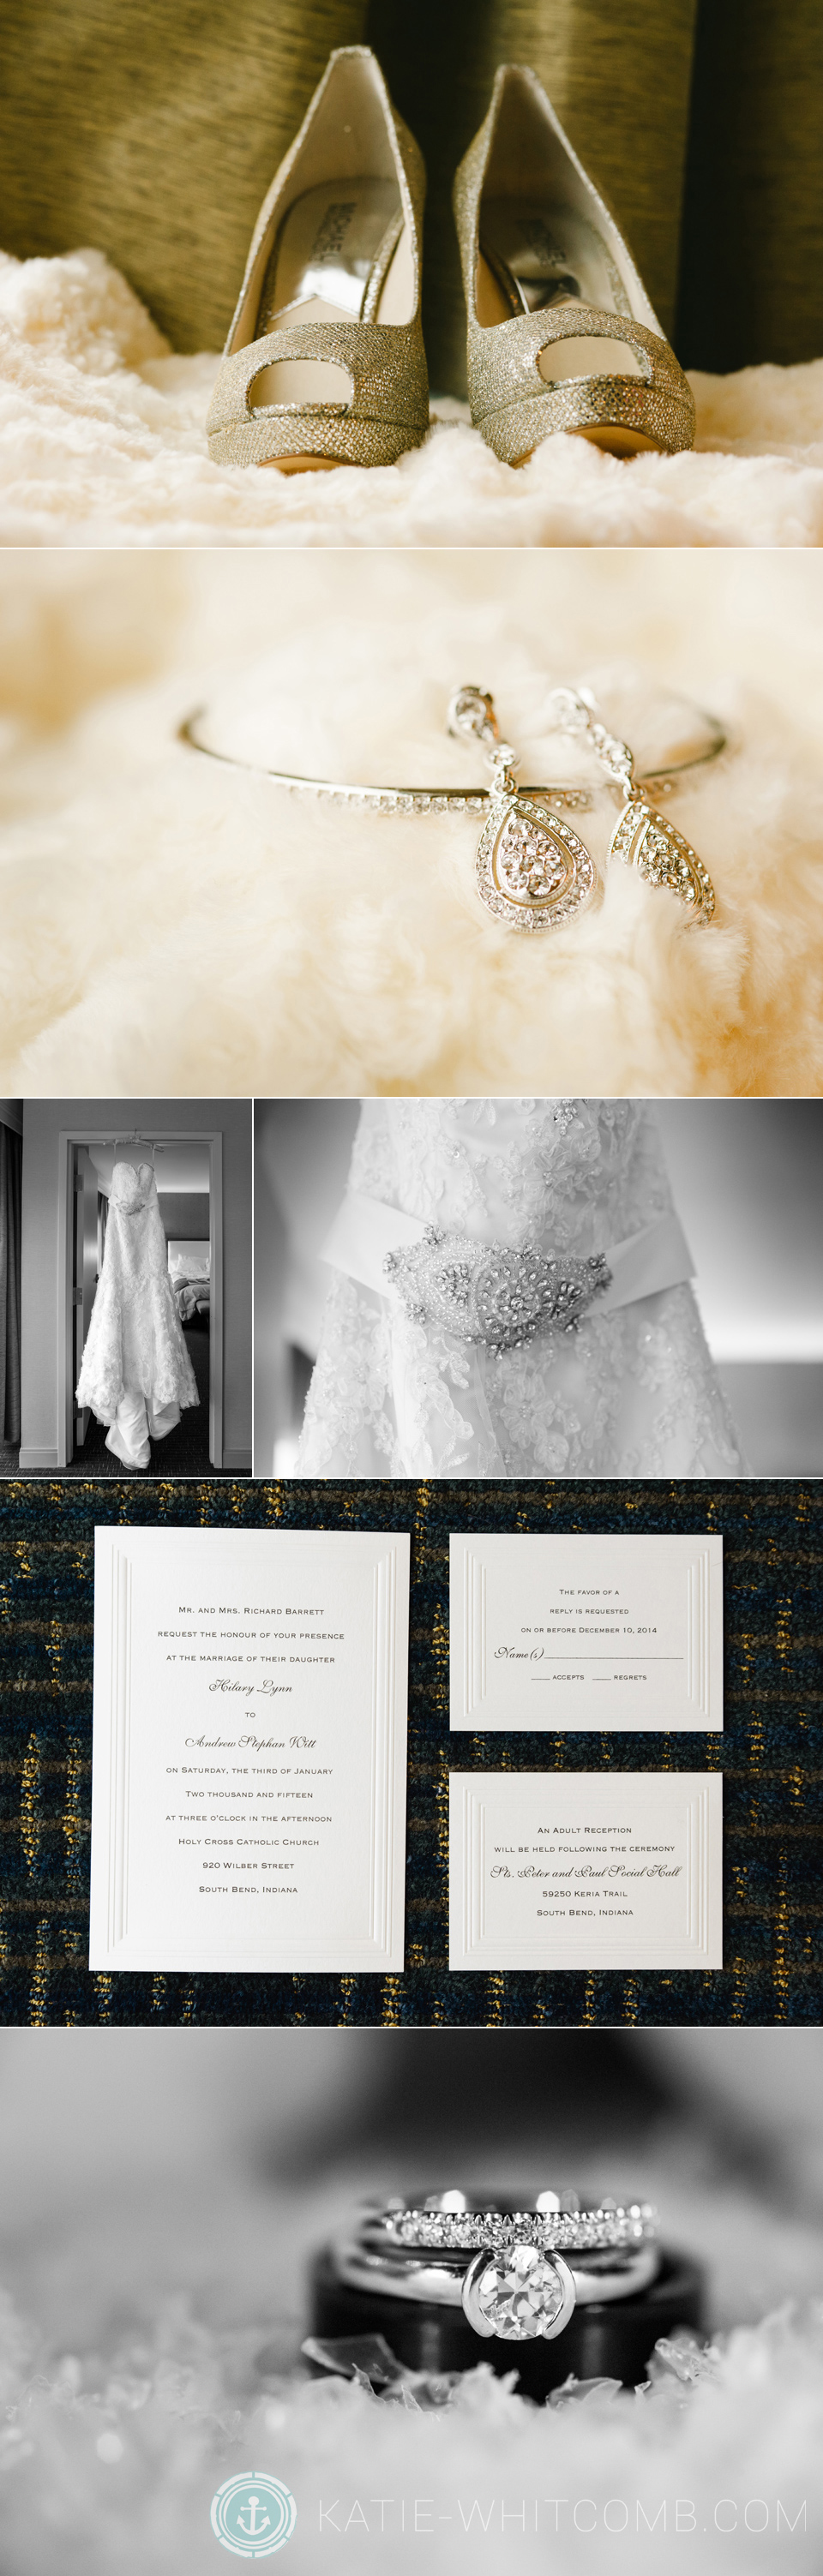 white, cream and antique color bridal details in this winter wedding in South Bend, IN